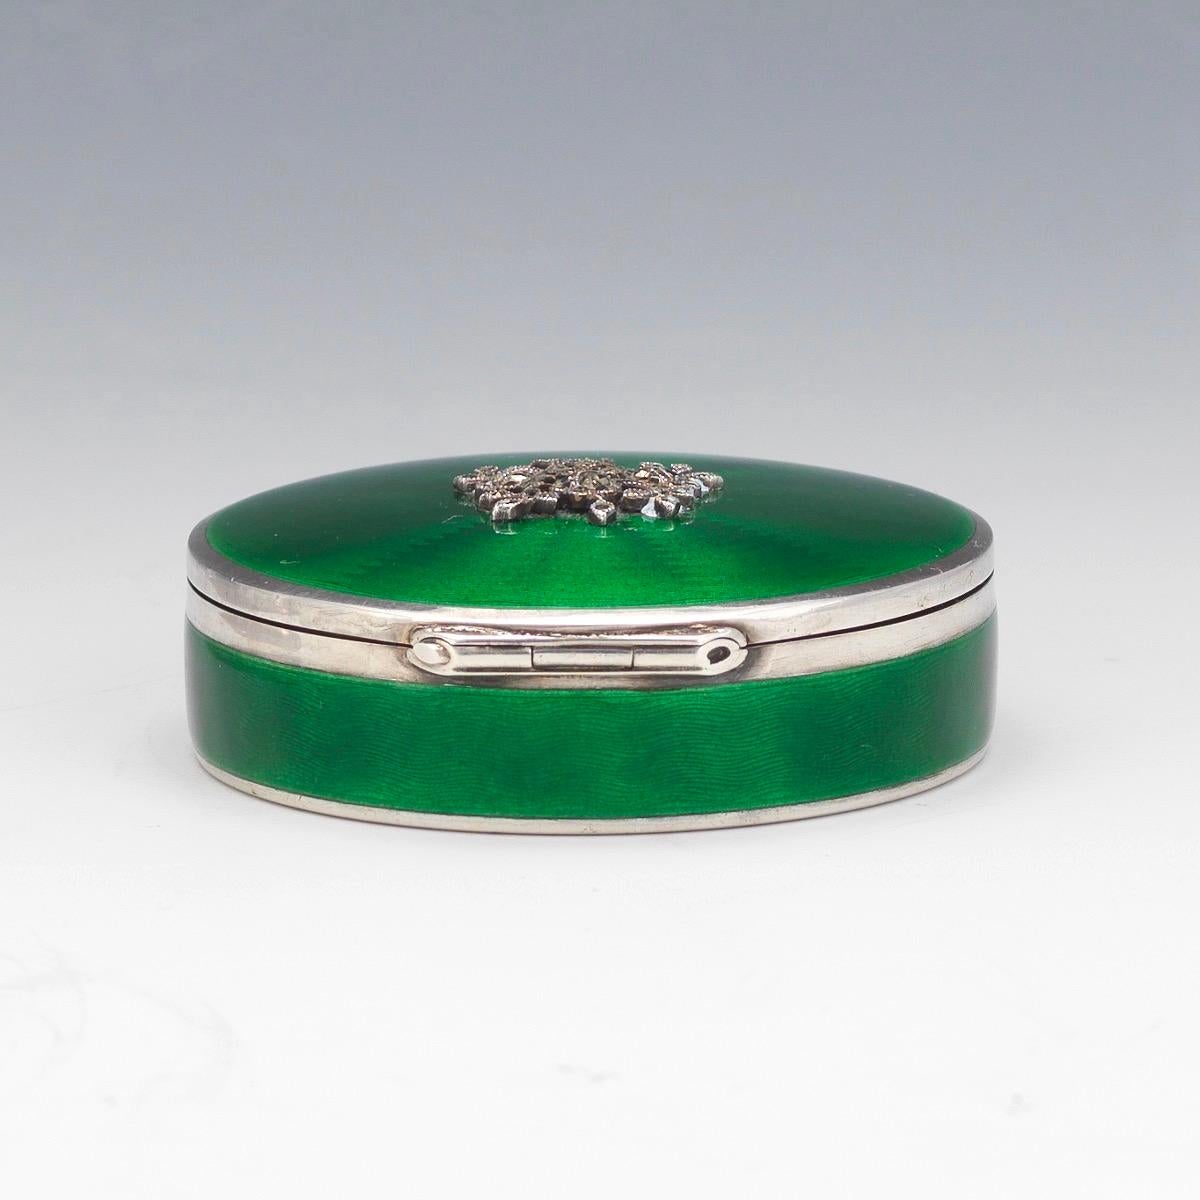 Enameled Early 20th Century Continental Silver Gilt and Green Guilloche Enamel Box